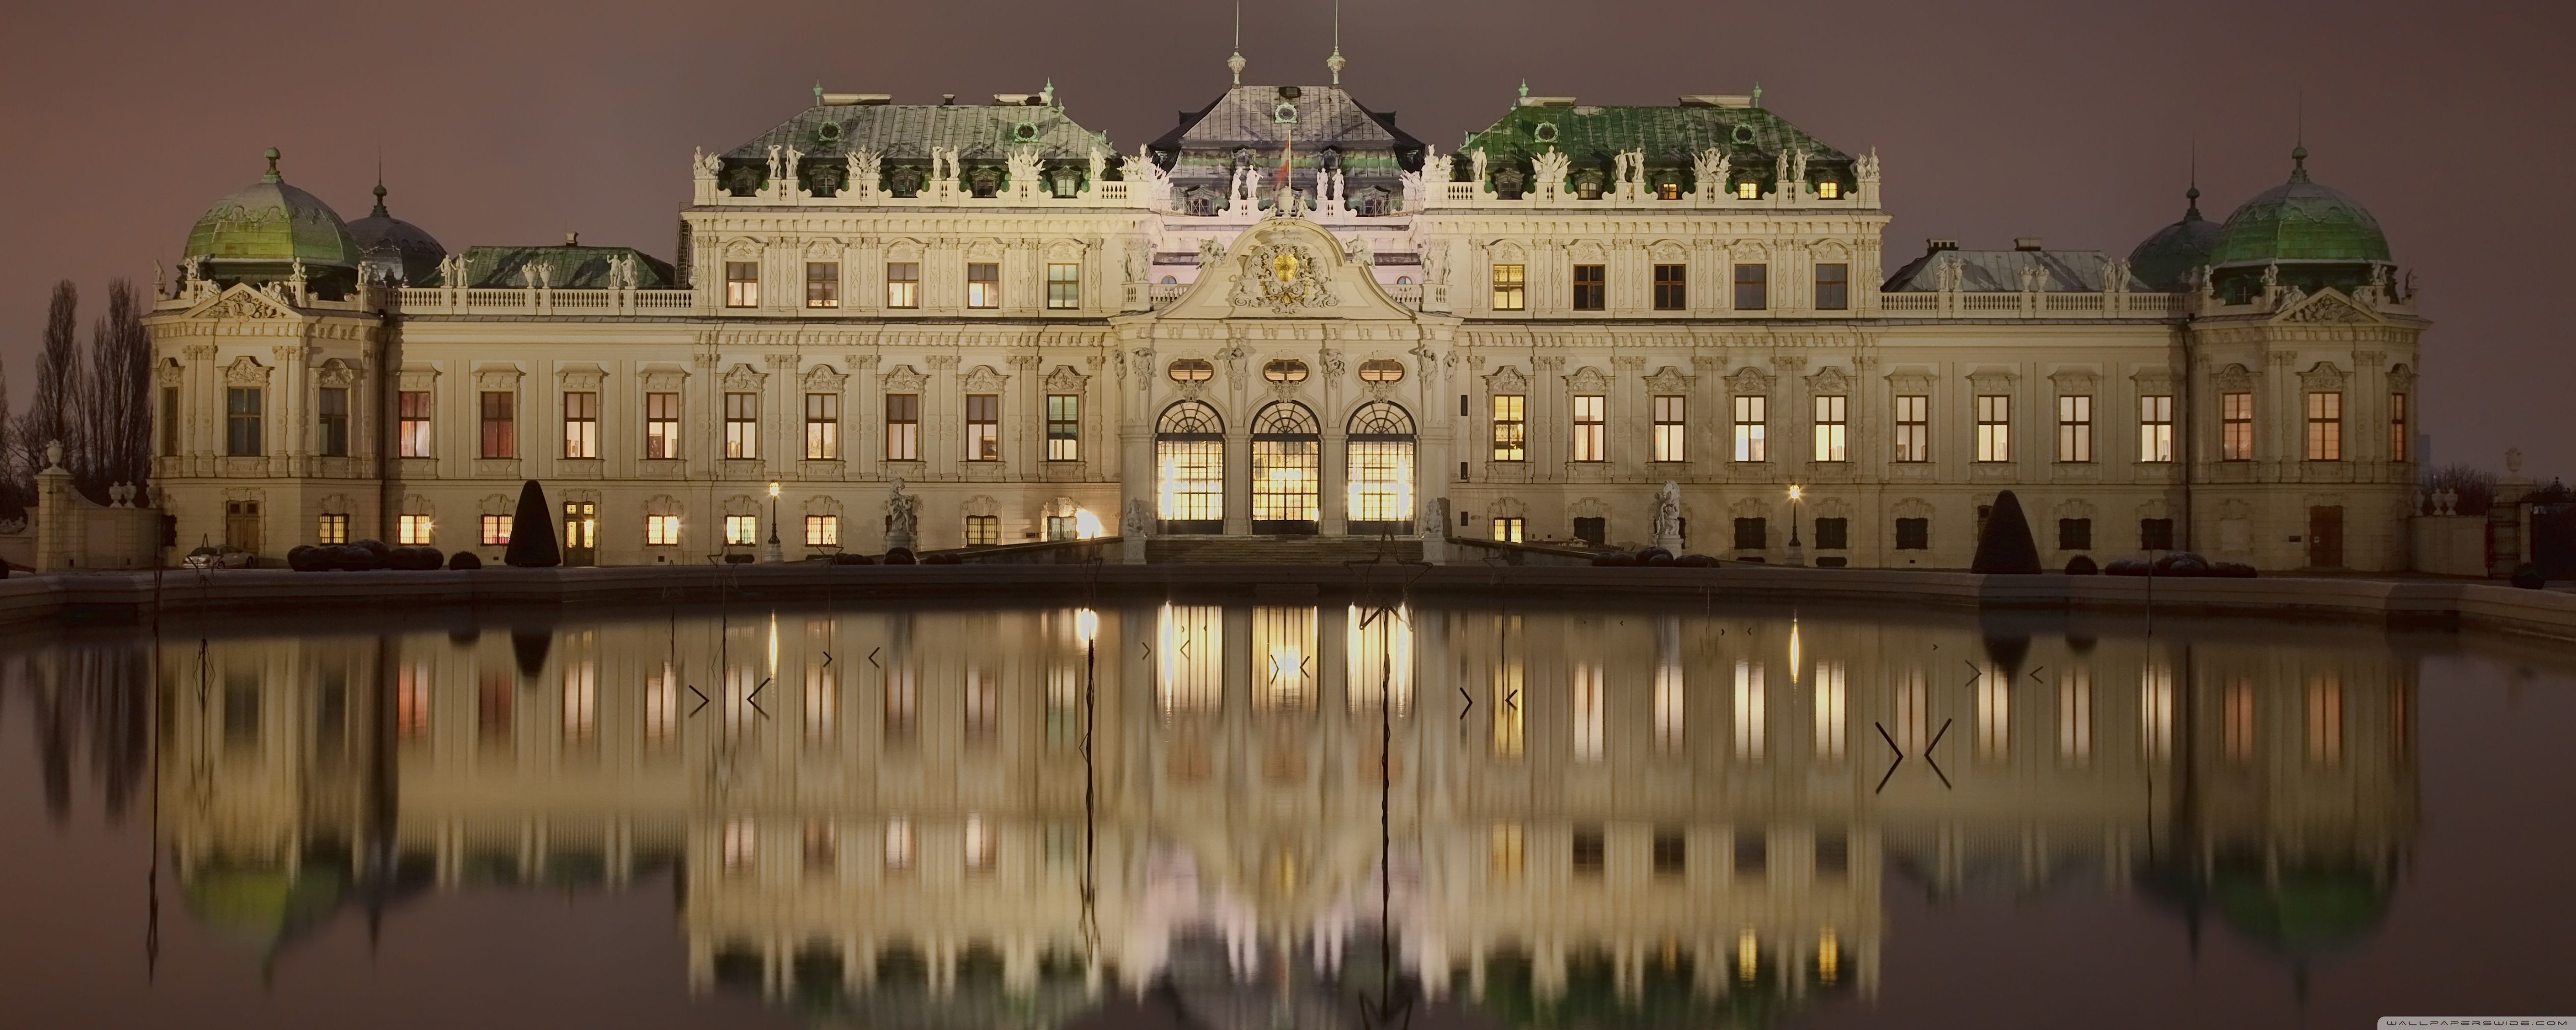 Belvedere Palace Vienna Ultra HD Desktop Background Wallpaper for: Multi Display, Dual Monitor, Tablet